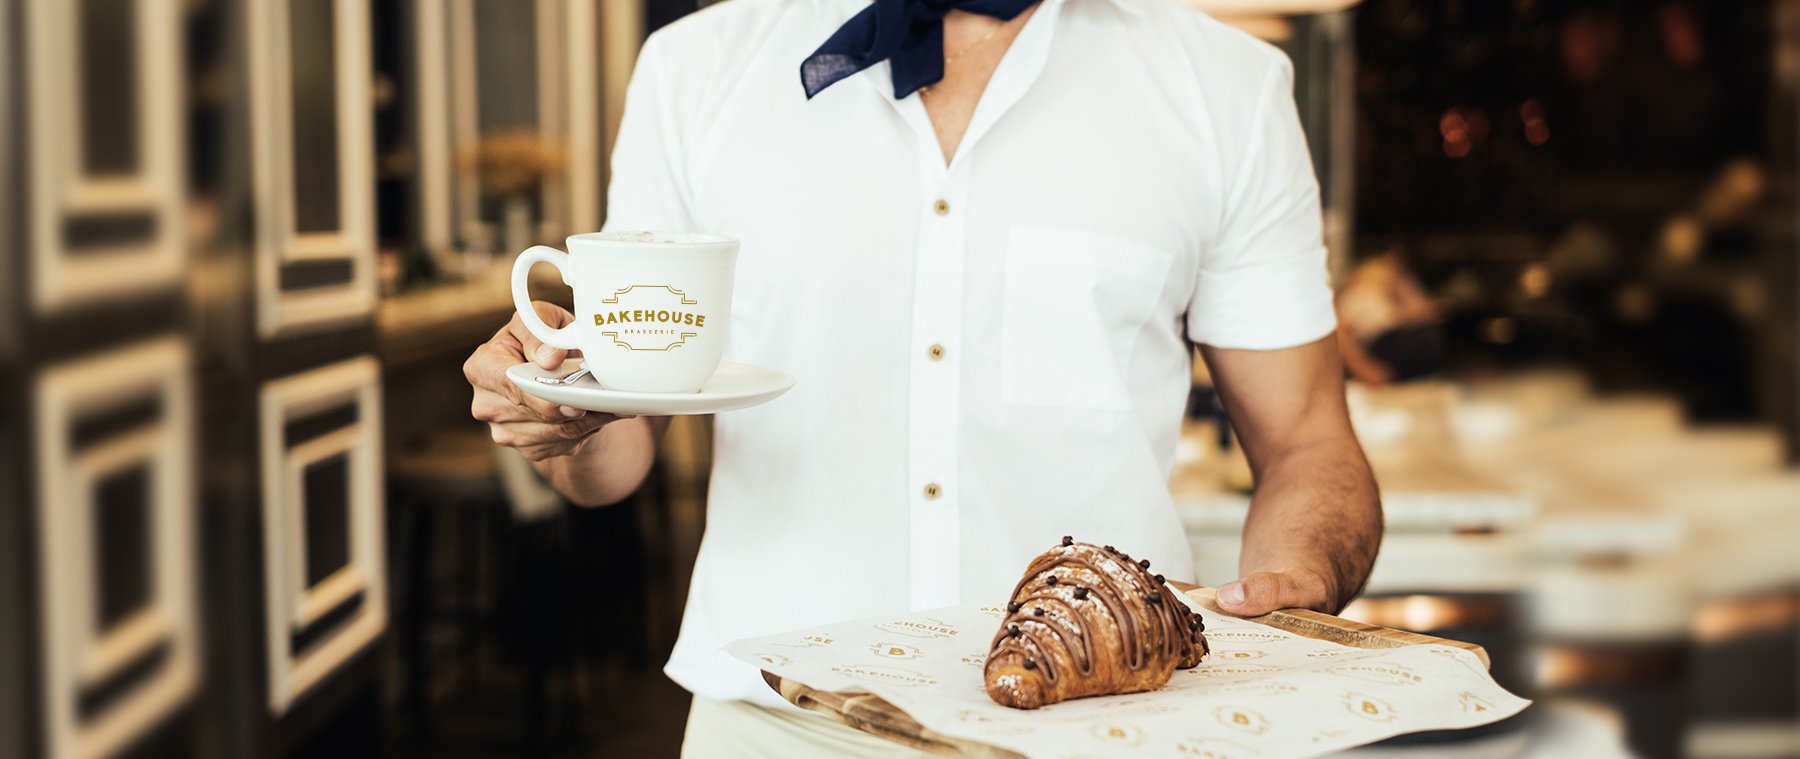 Jacober Creative identity design for Bakehouse Brasserie - Photo of a waitress holding a branded mug and pastry